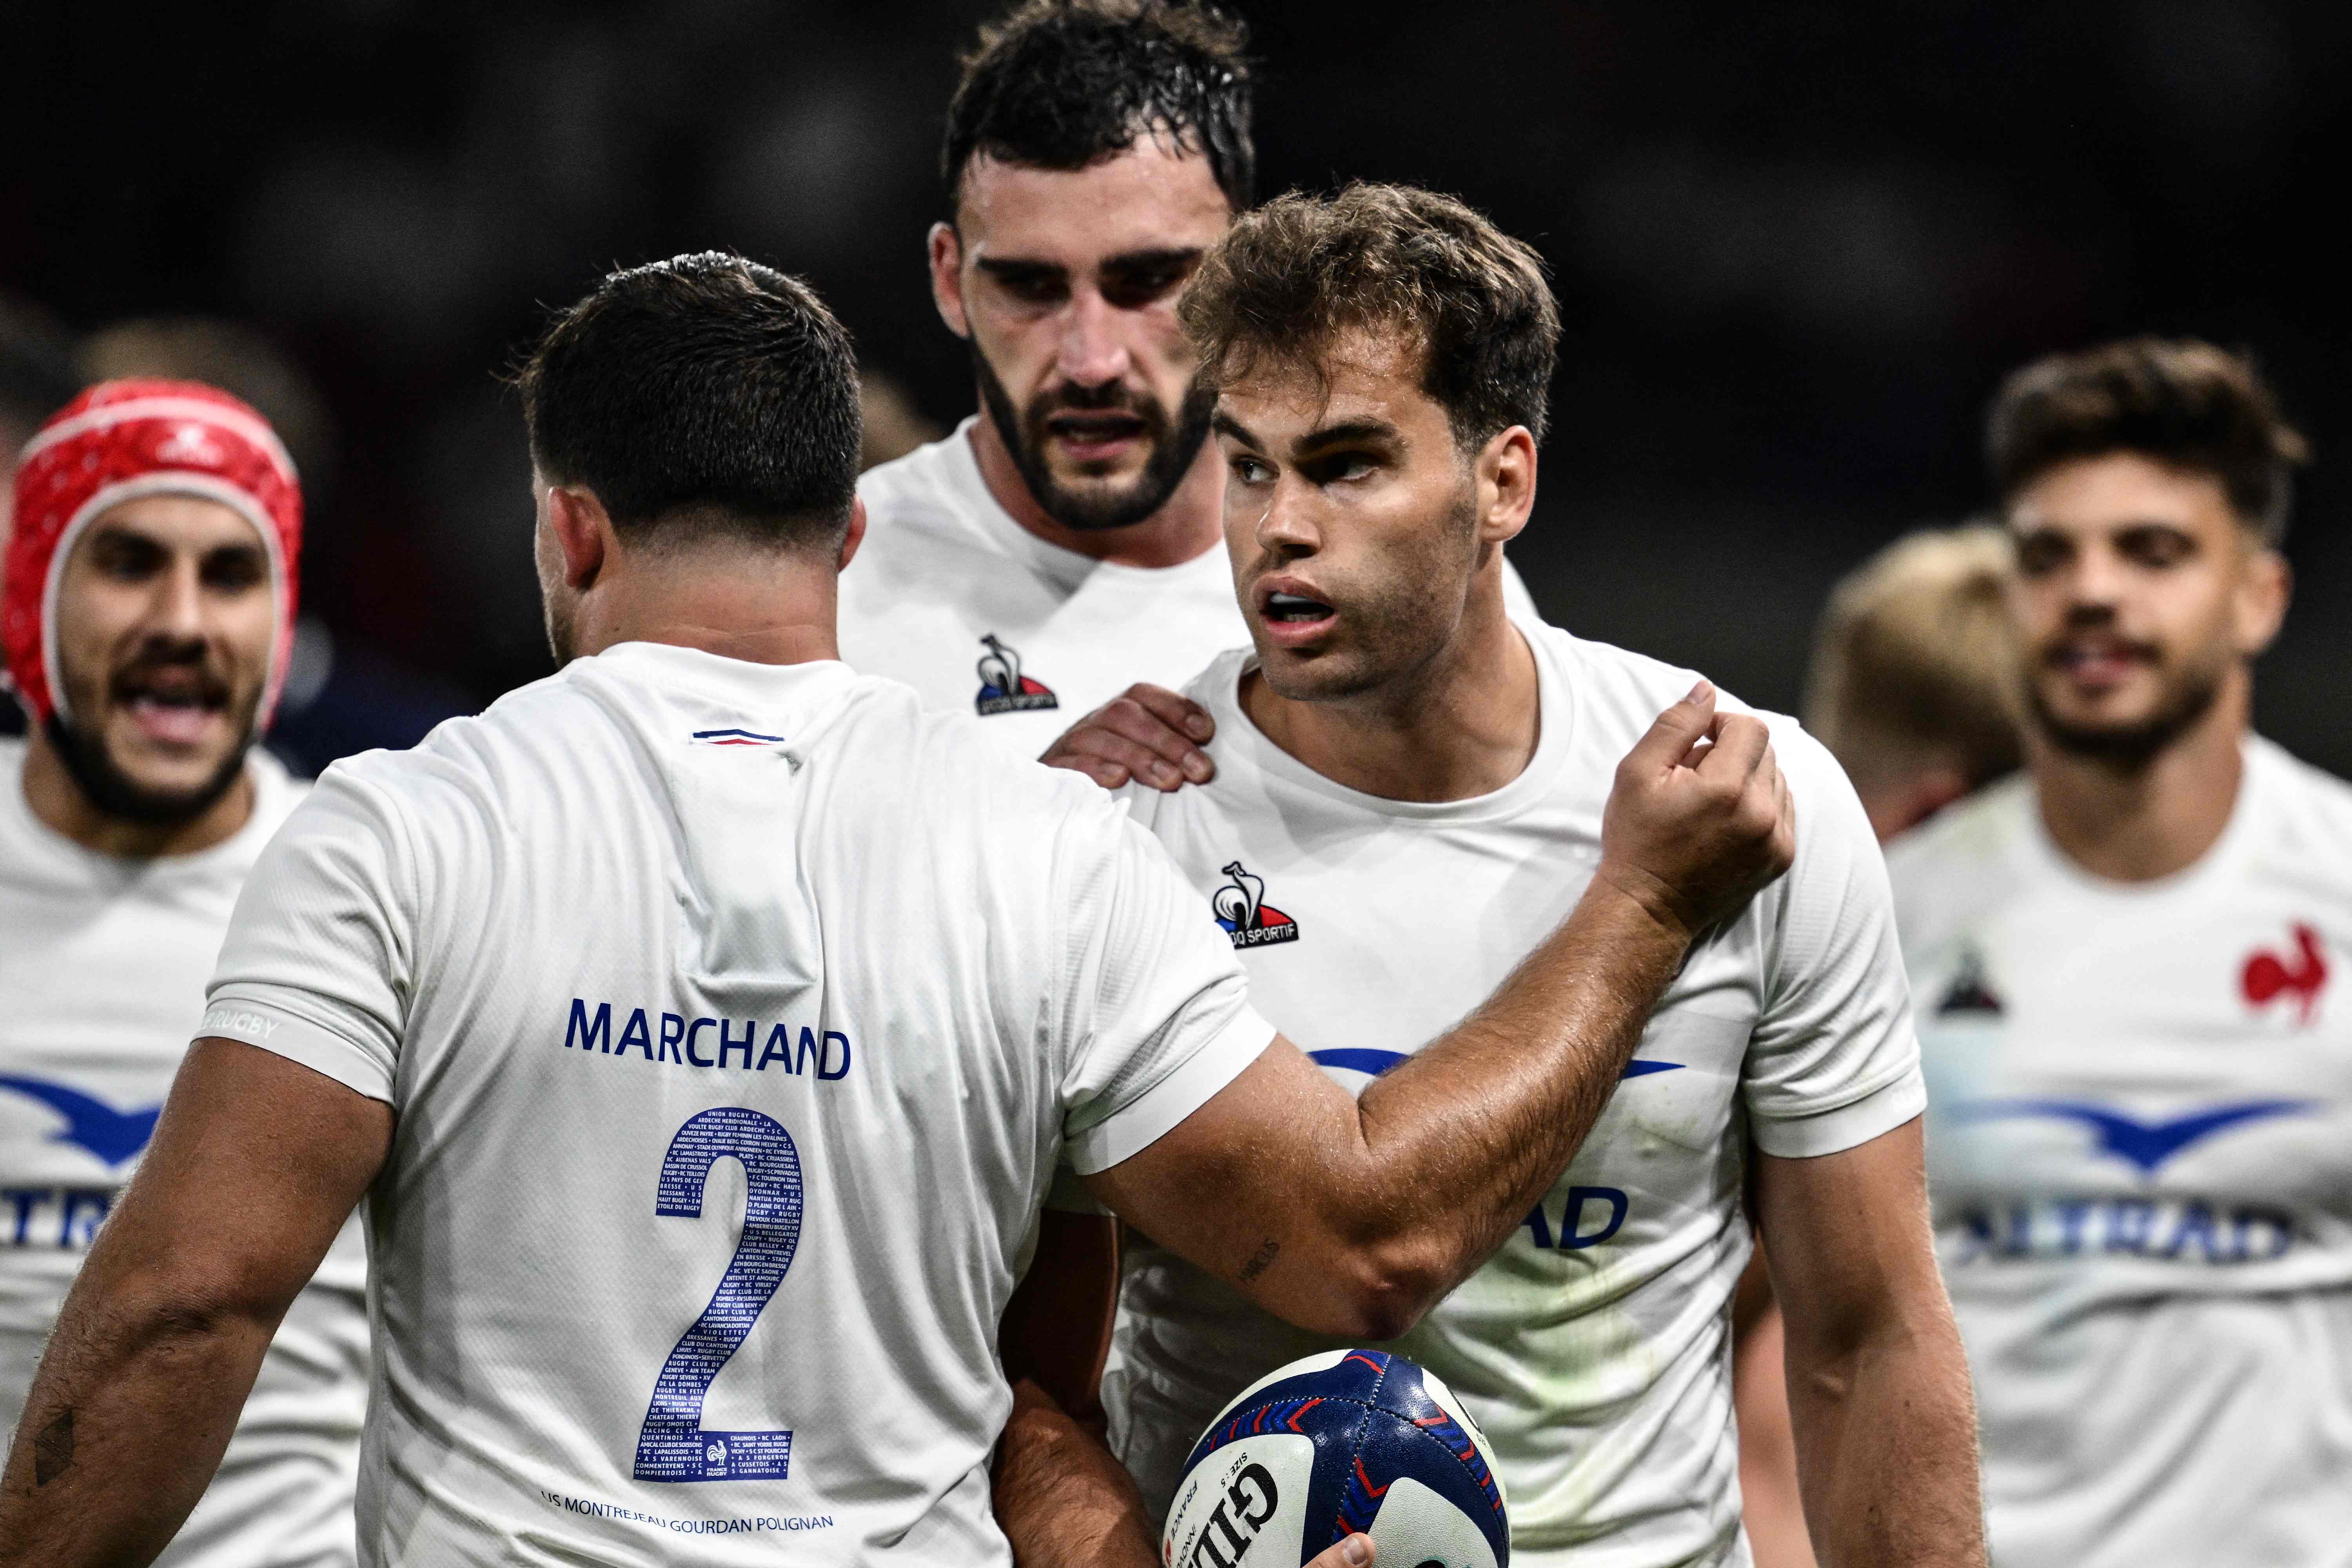 french sports channels rugby